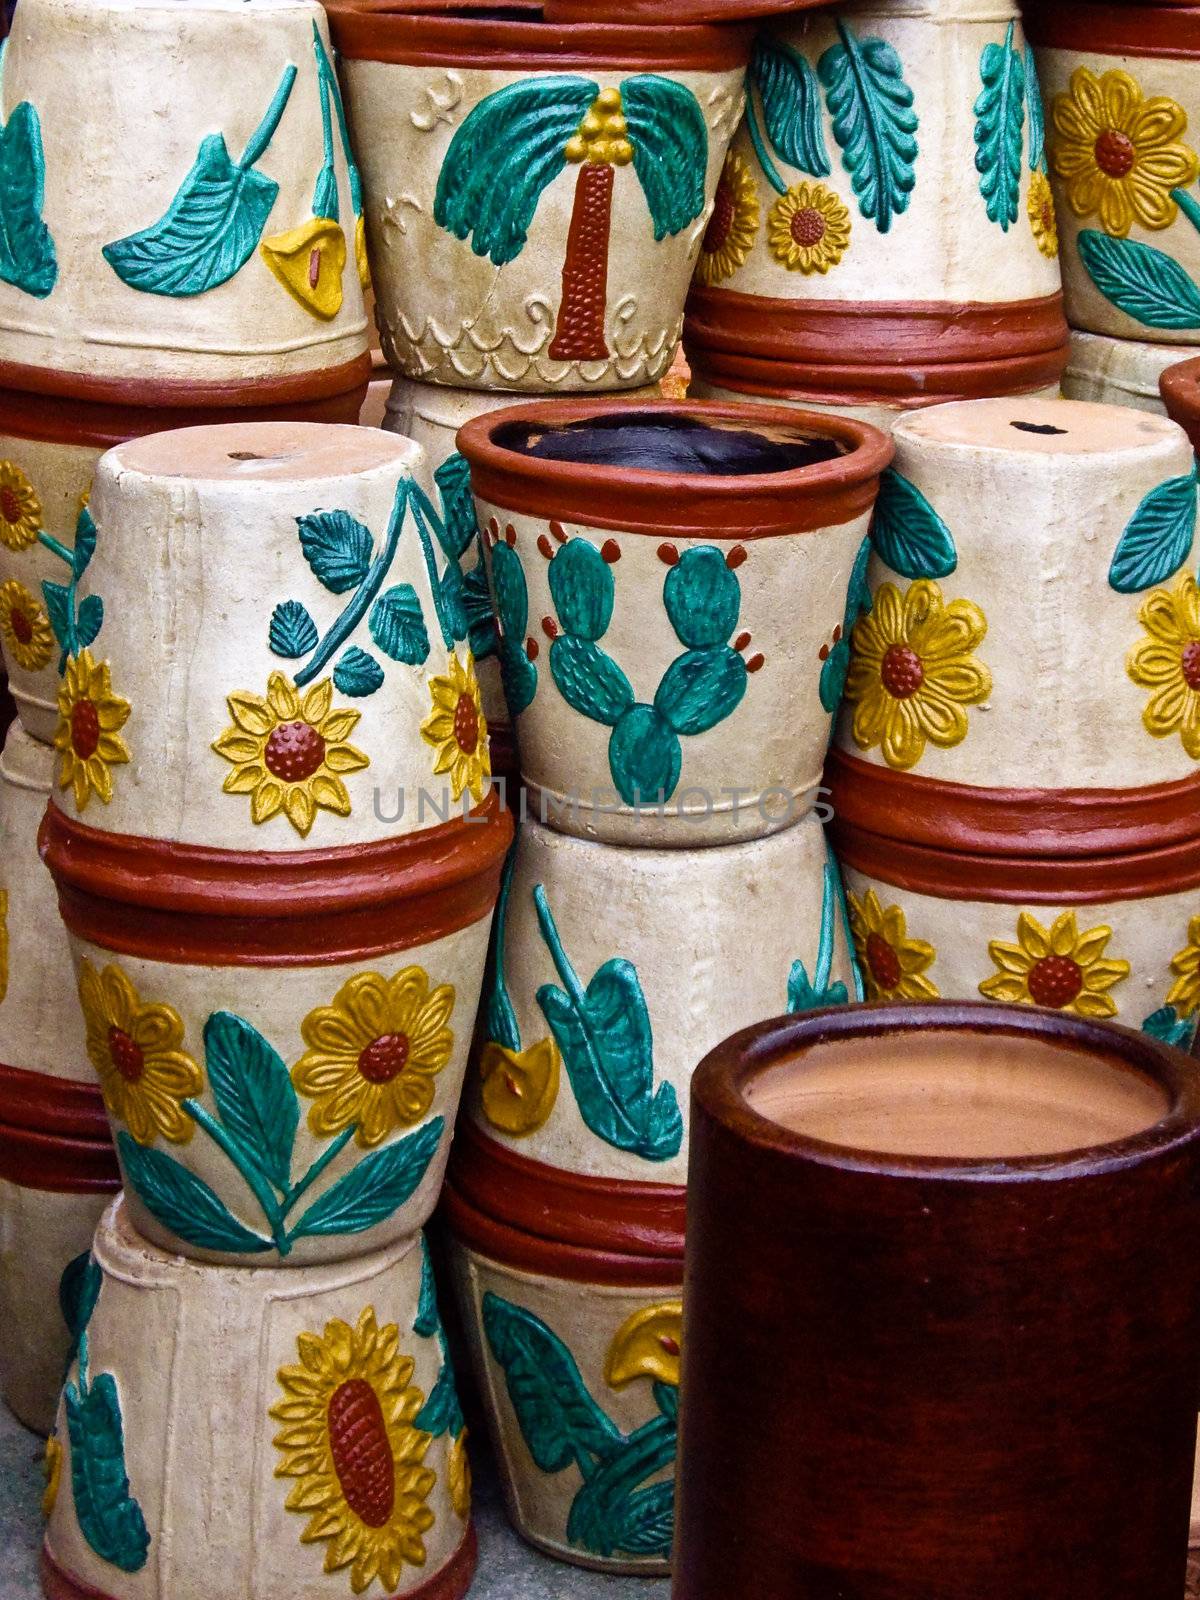 Flowerpots stacked in Mexican market by emattil